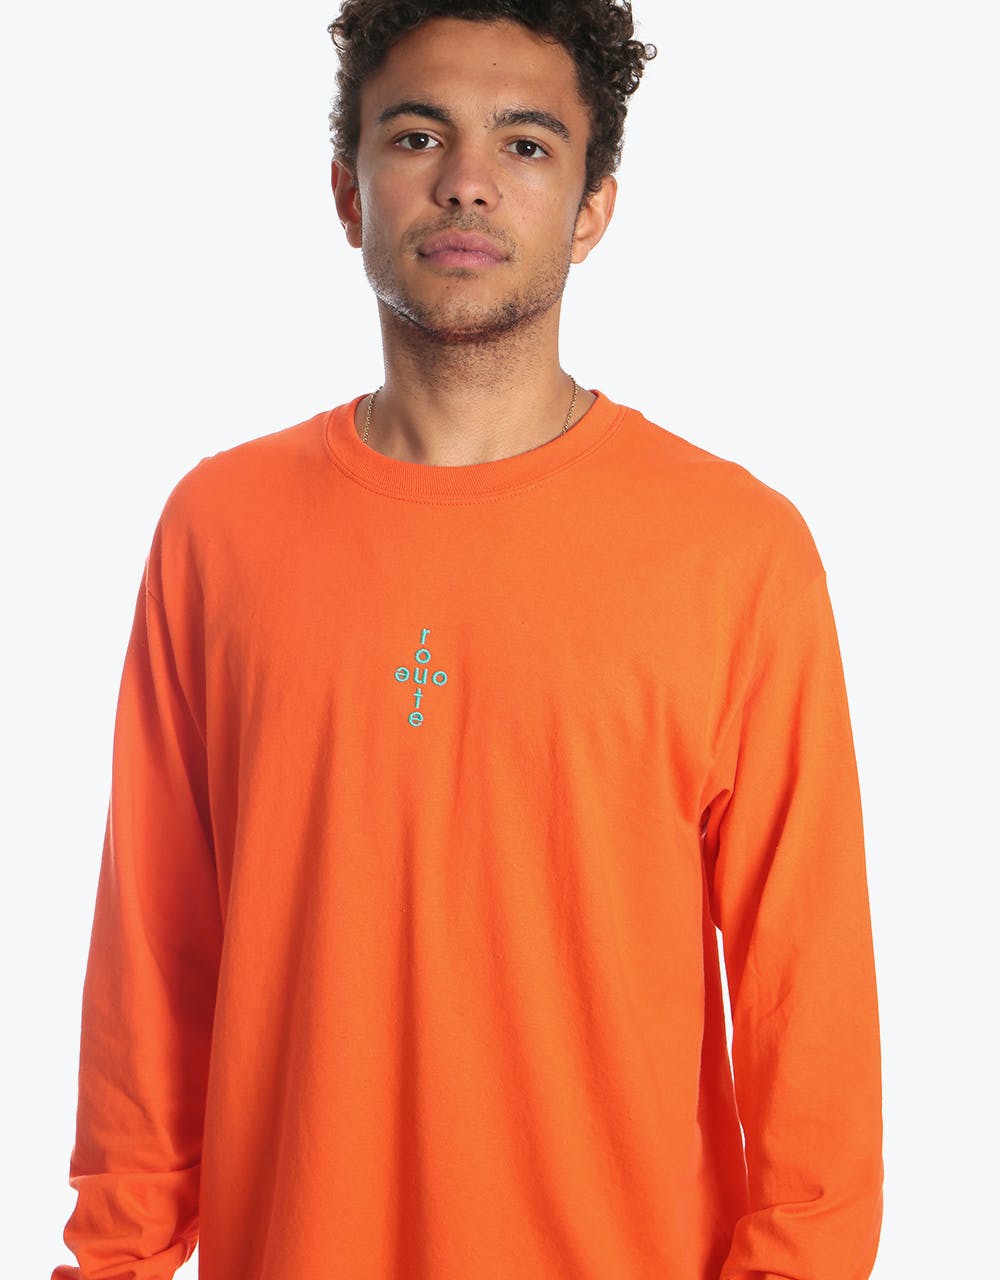 Route One Crossover Long Sleeve T-Shirt - Orange